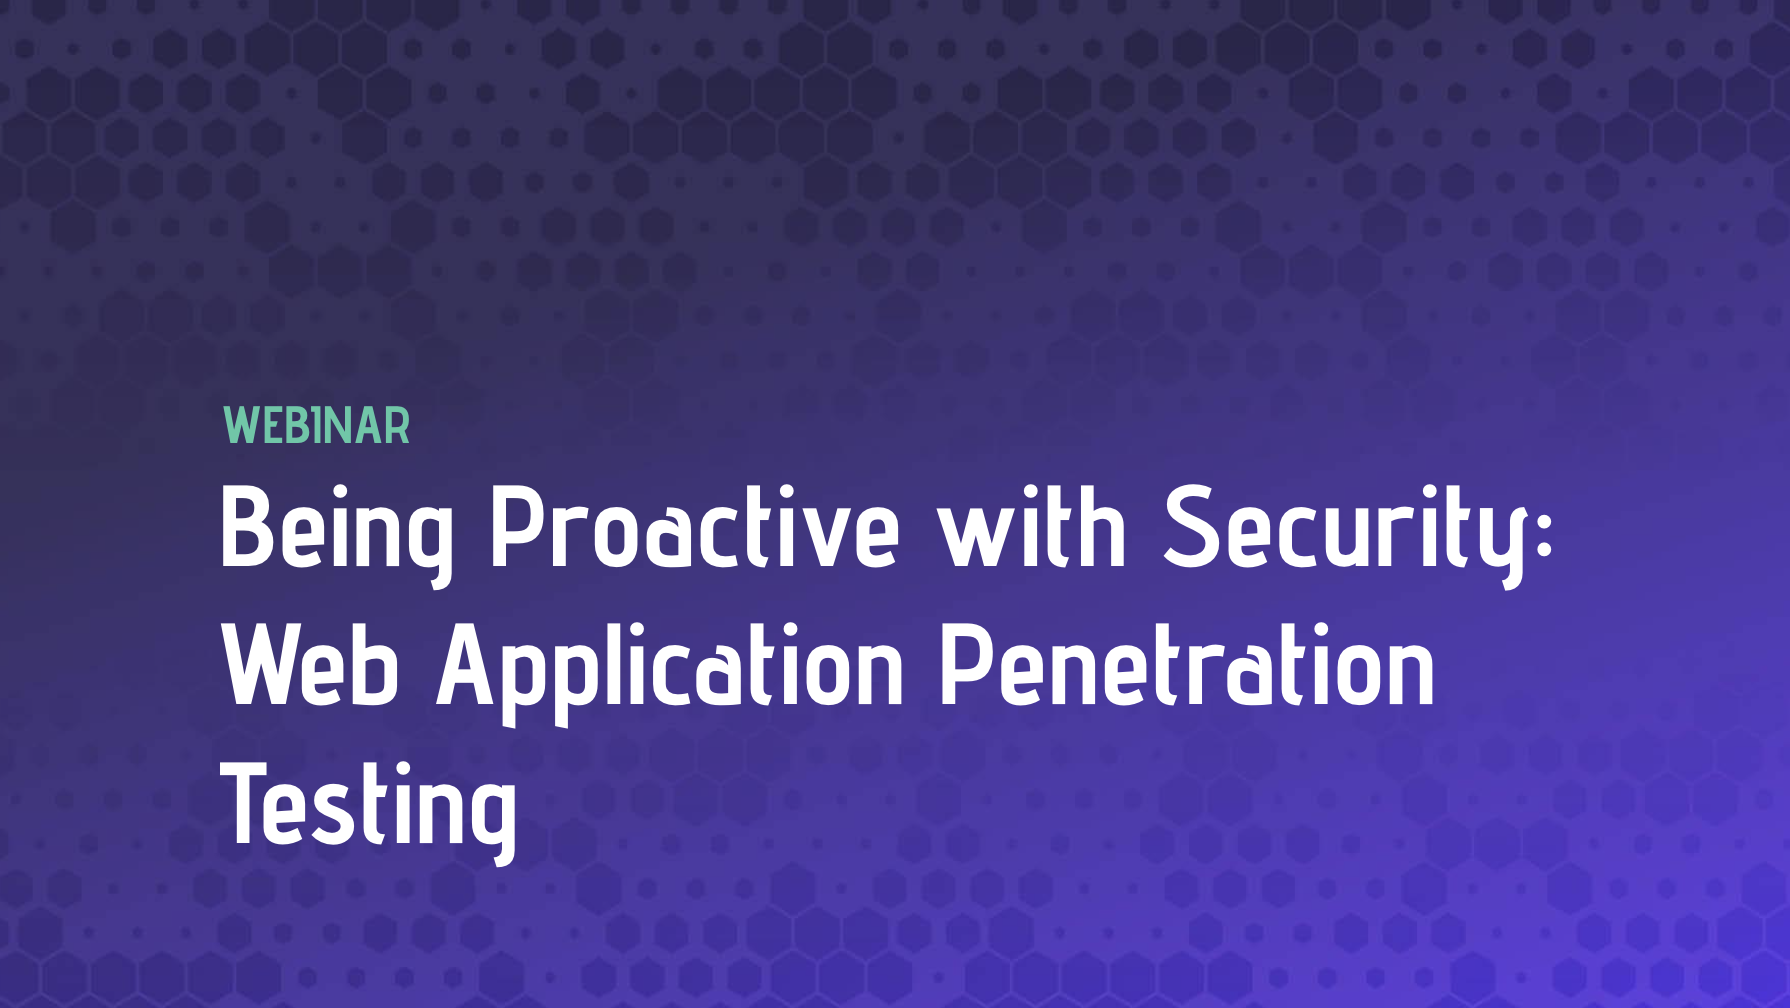 Being Proactive with Security: Web Application Penetration Testing